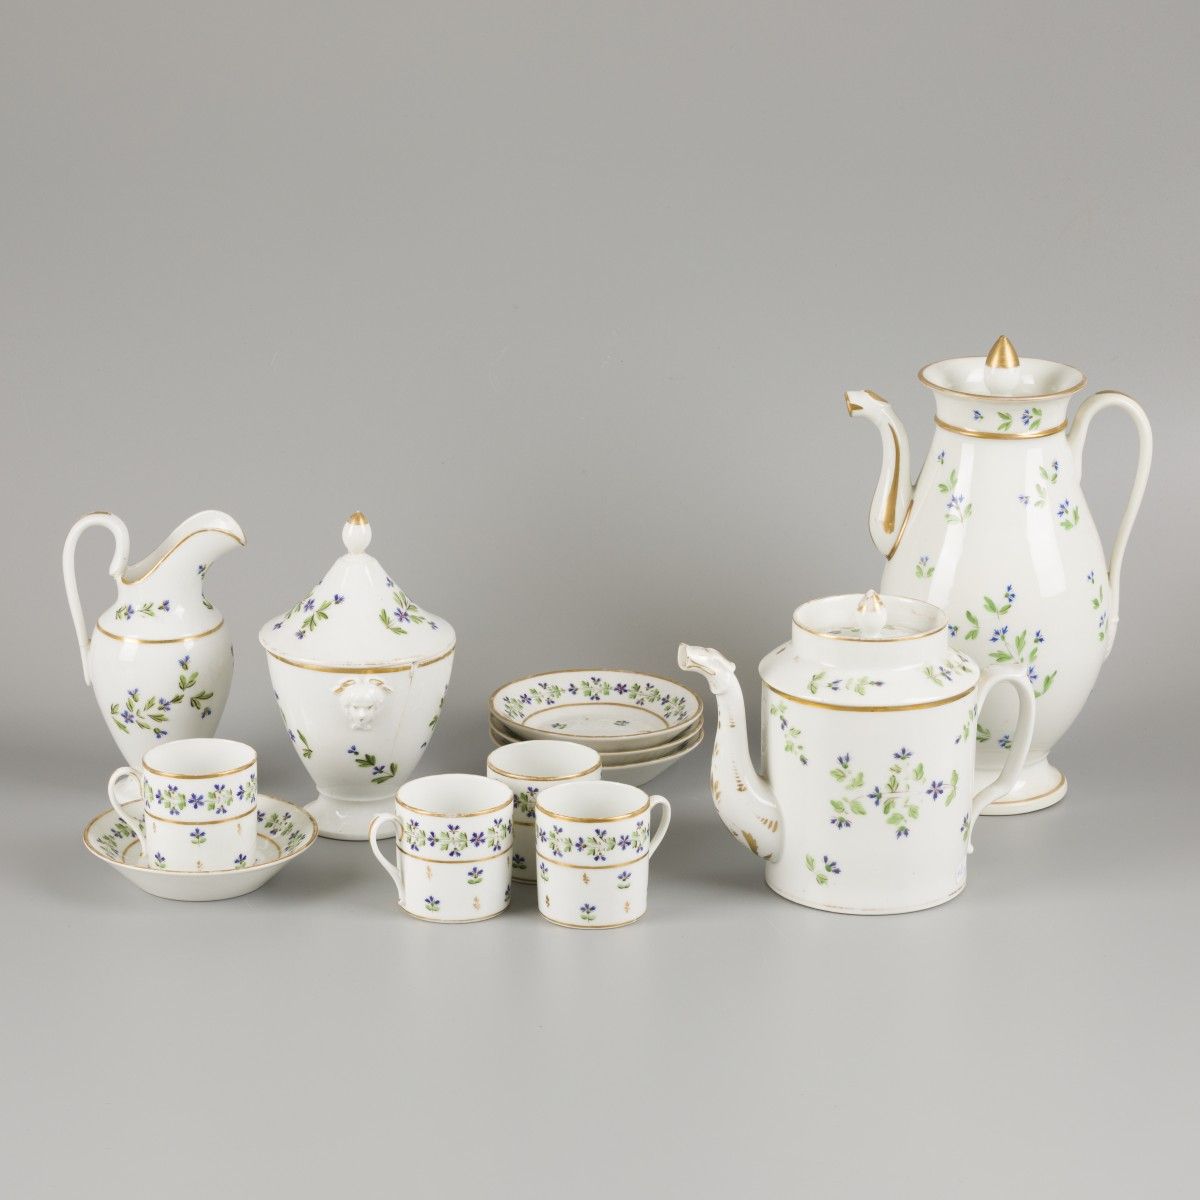 A porcelain coffee/tea set with cornflower decorations, France, early 19th centu&hellip;